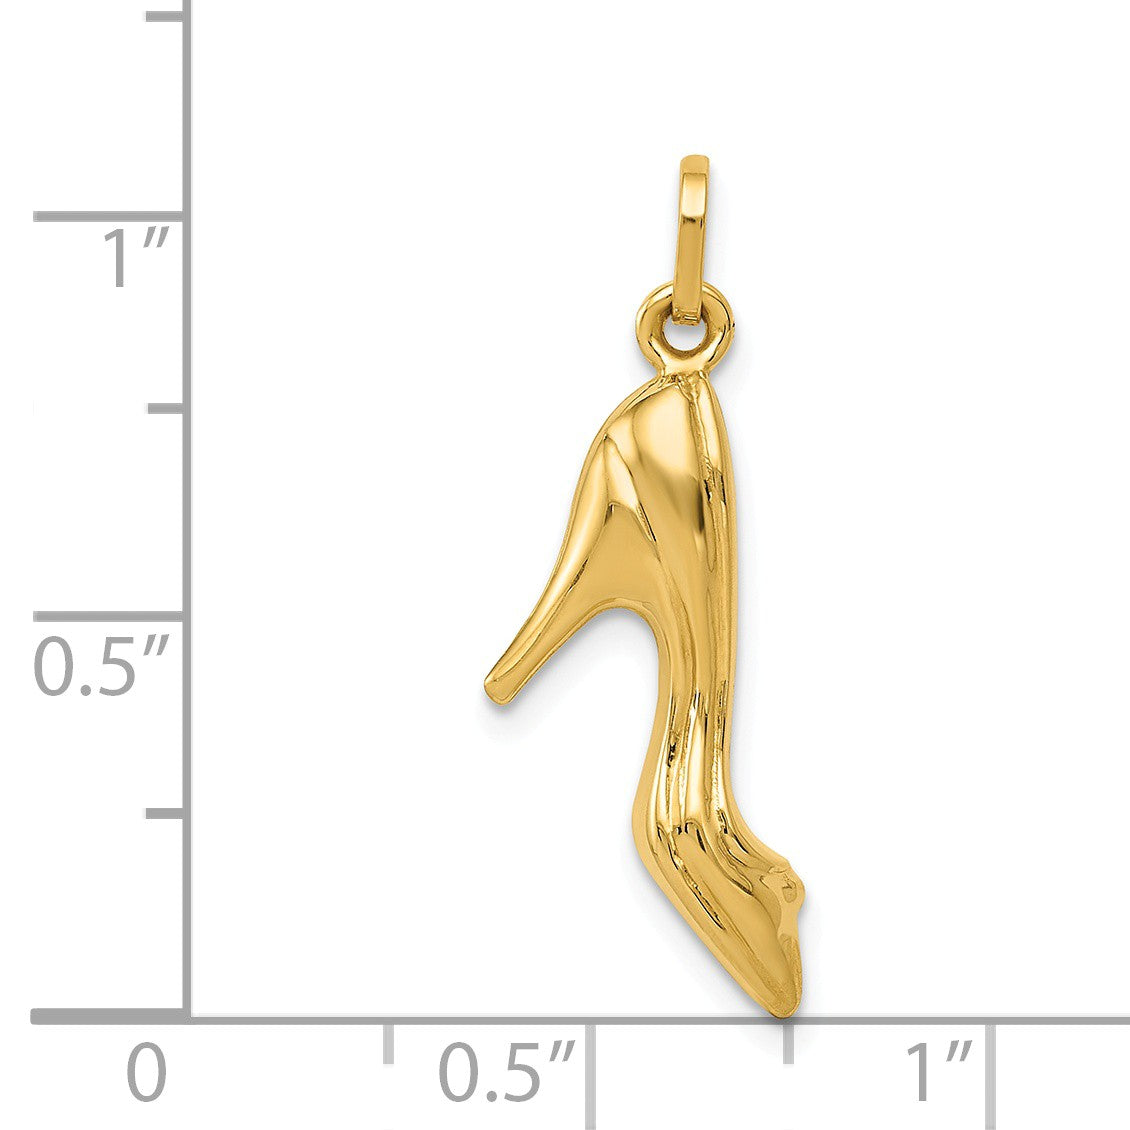 Alternate view of the 14k Yellow Gold 3D Polished High Heel Shoe Pendant by The Black Bow Jewelry Co.